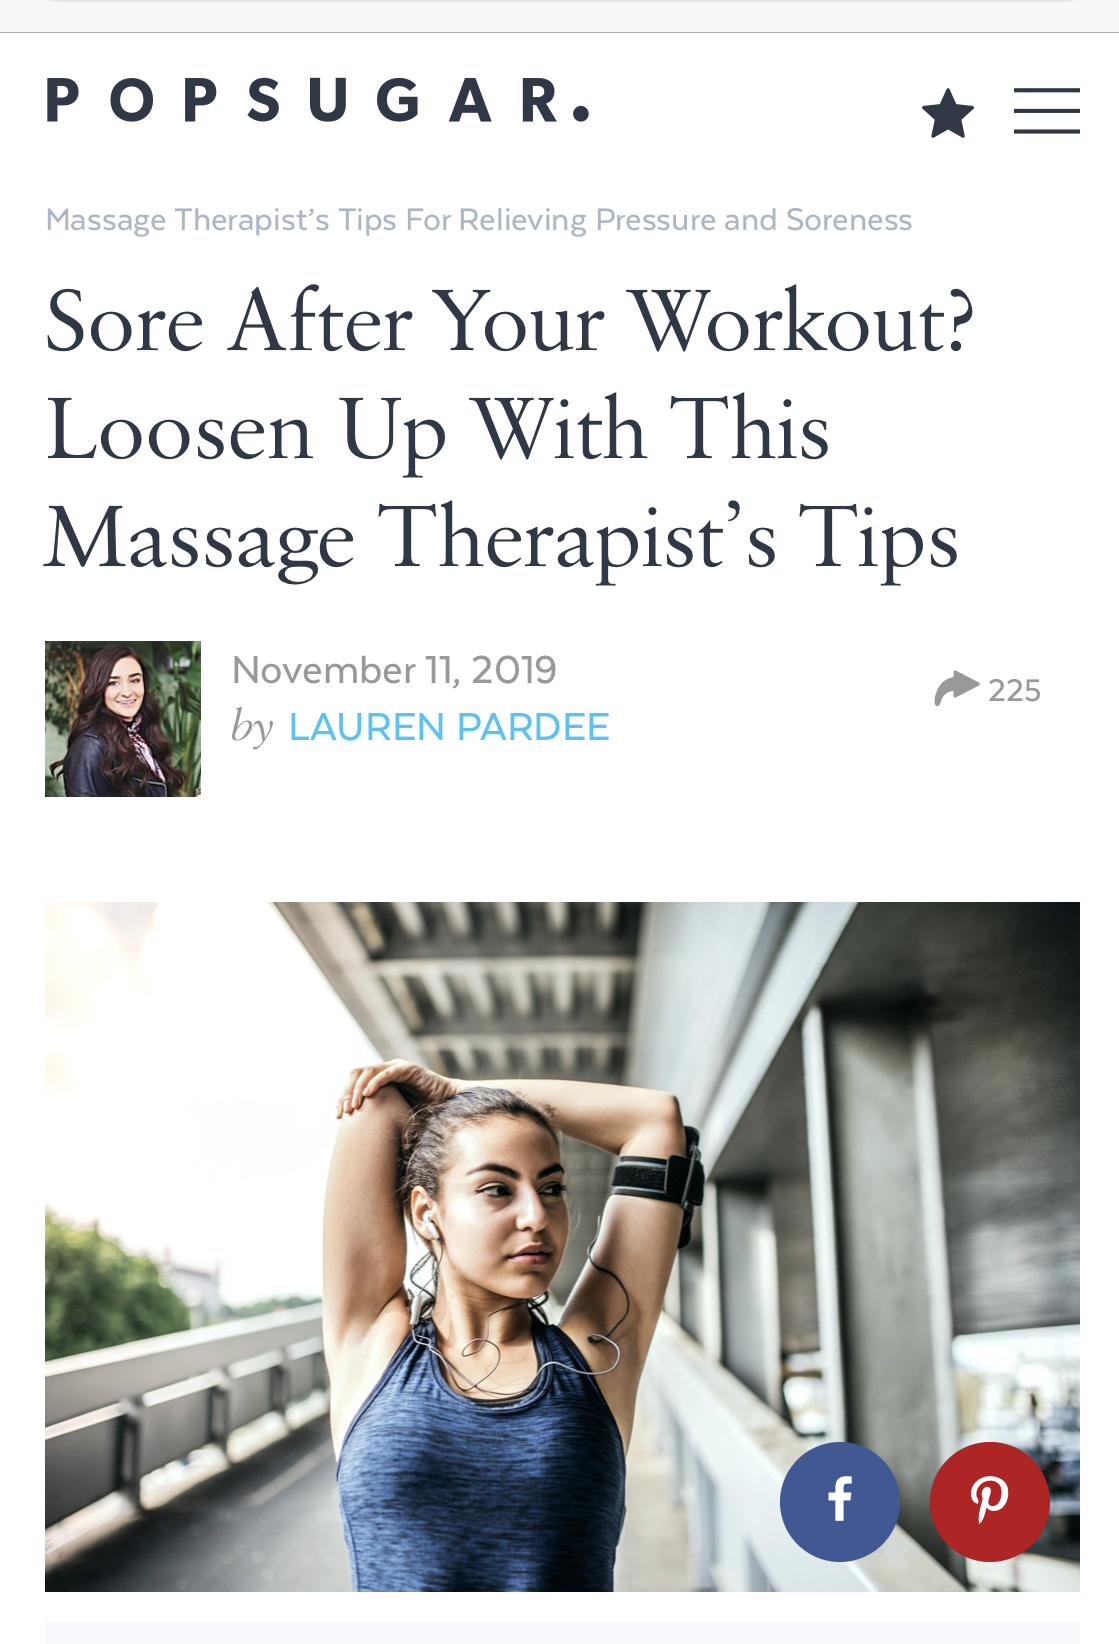 Massage therapy tips for being sore after a work out